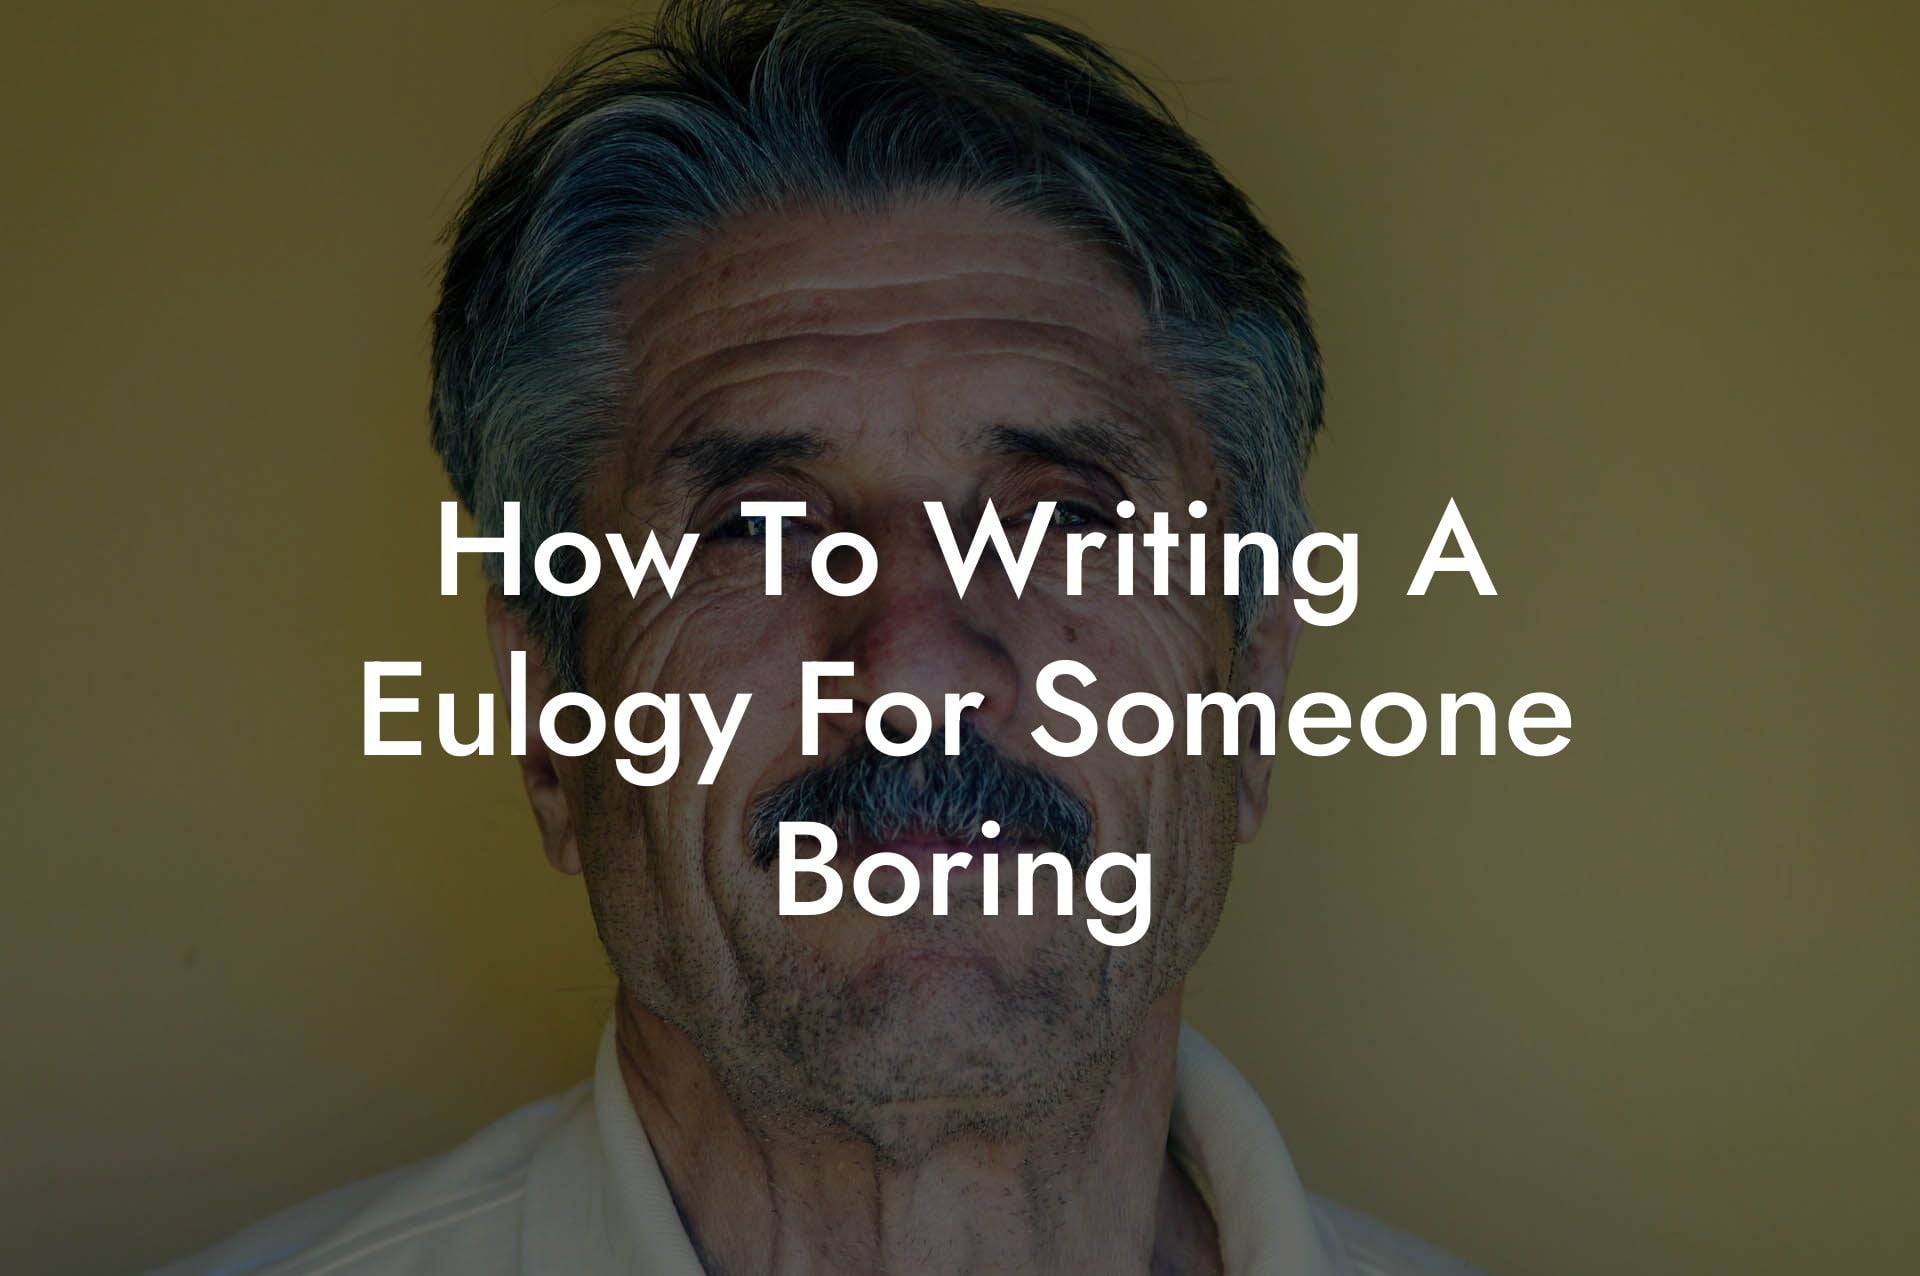 How To Writing A Eulogy For Someone Boring